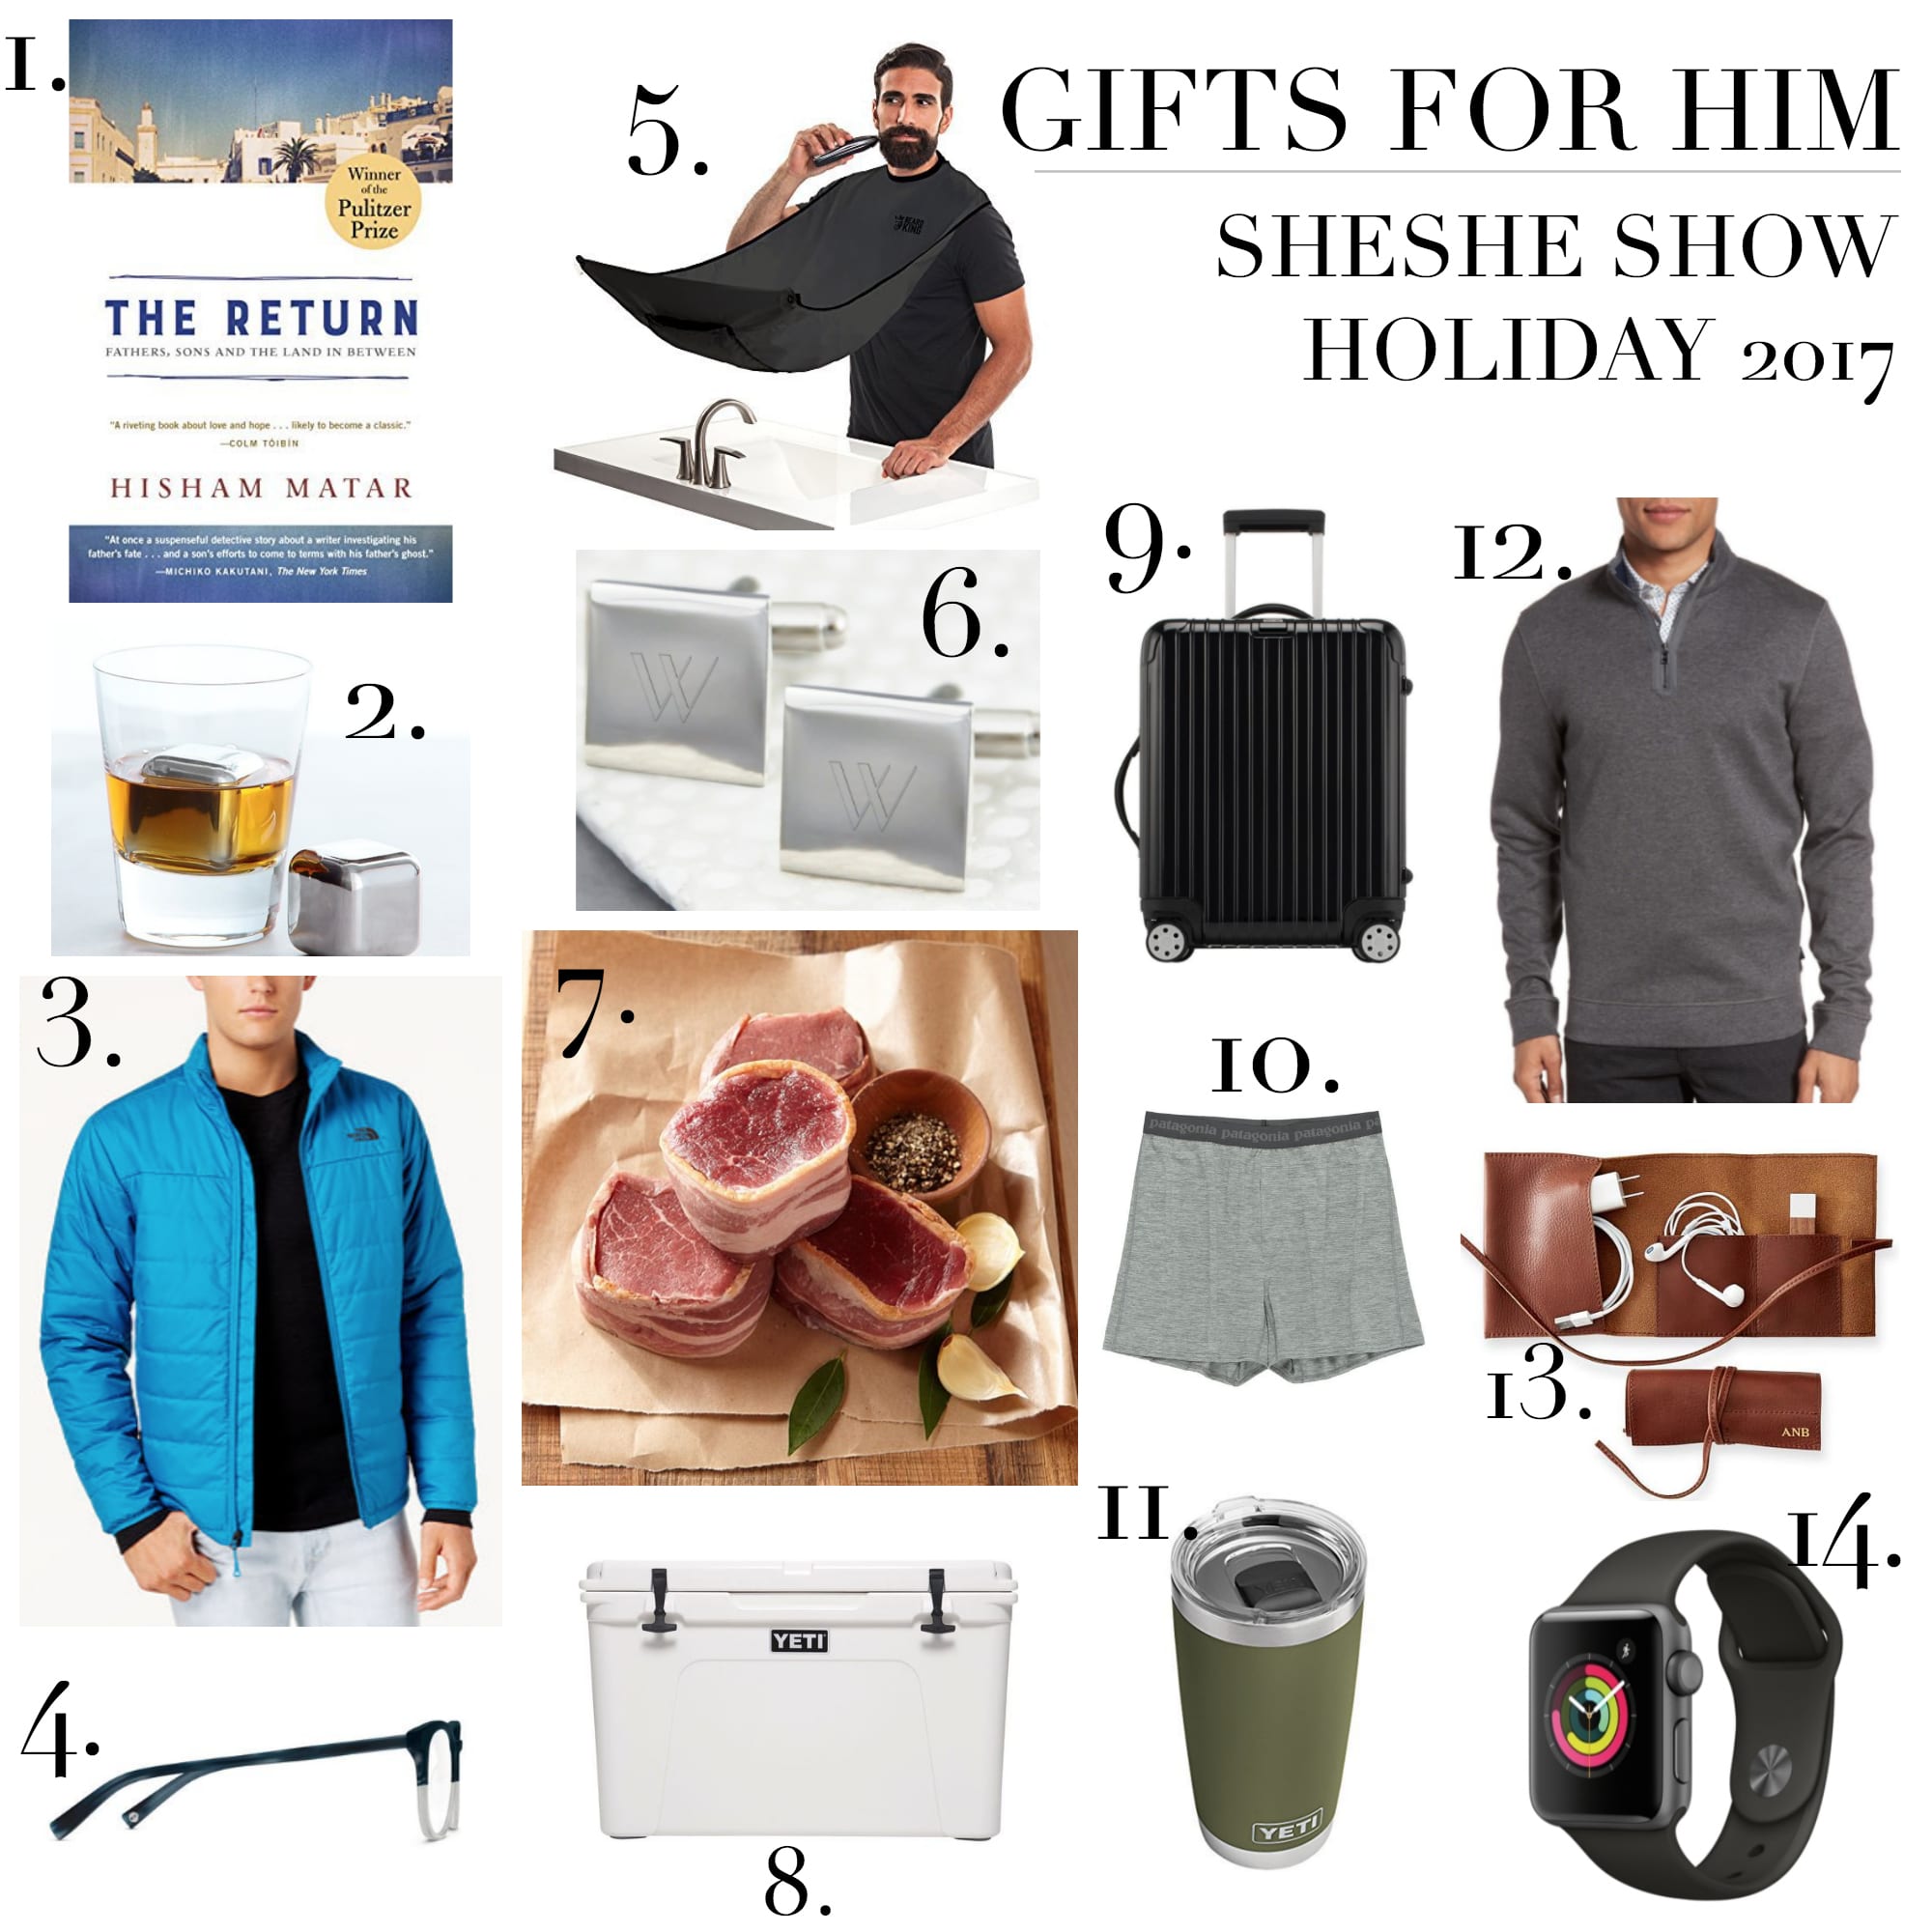 Men's Gift Guide, Gift Guide, Holiday